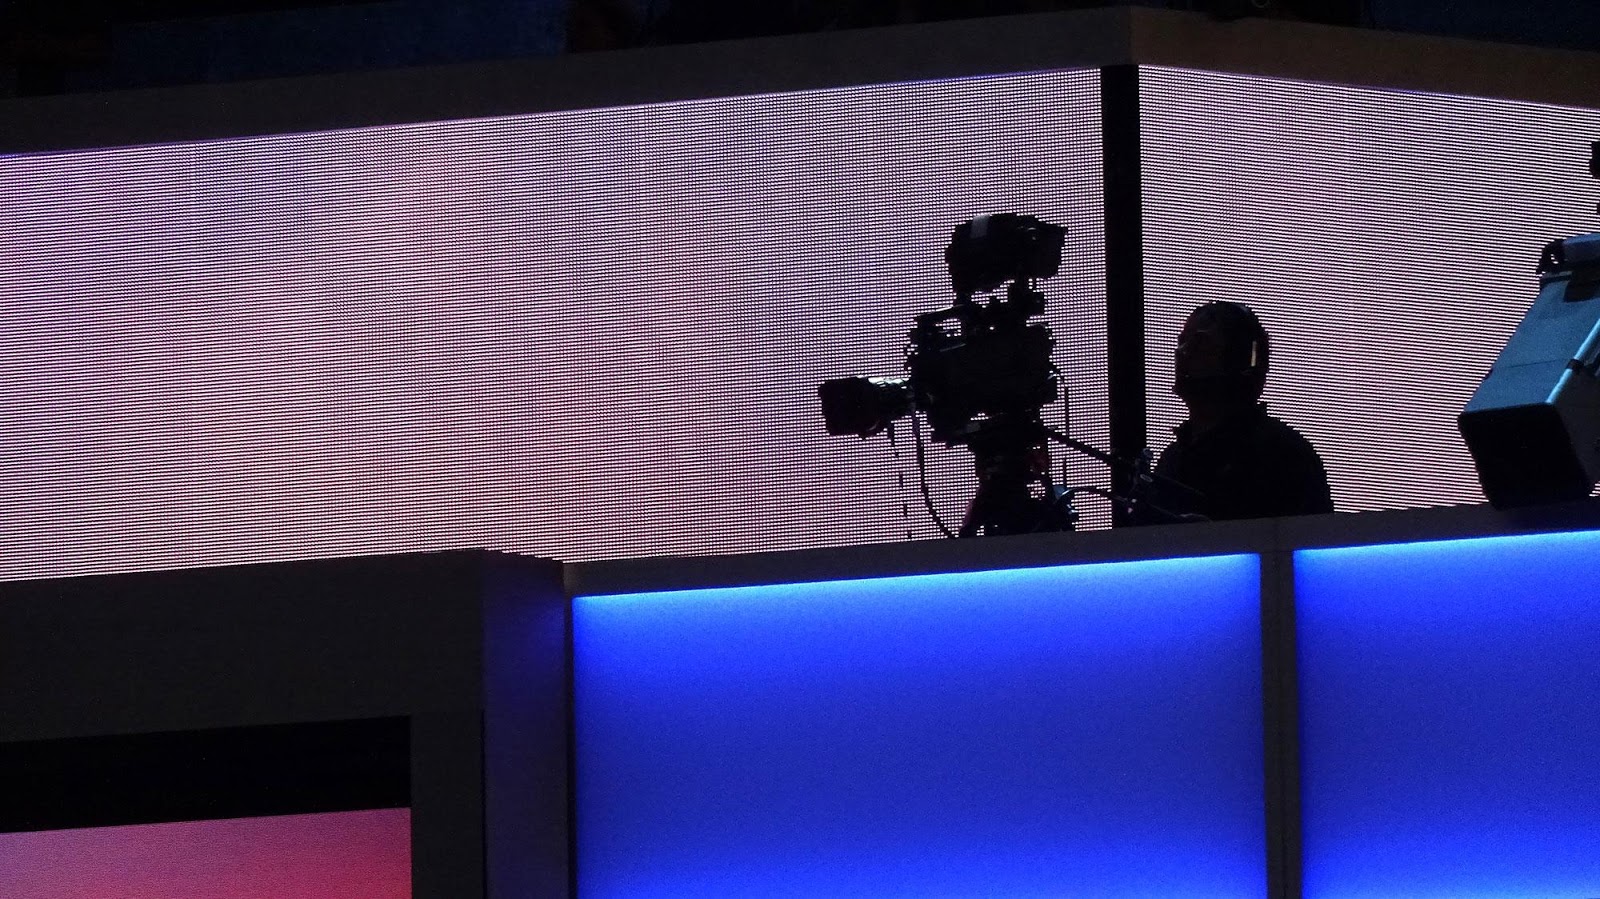 silhouette of camera operator against large LED screen